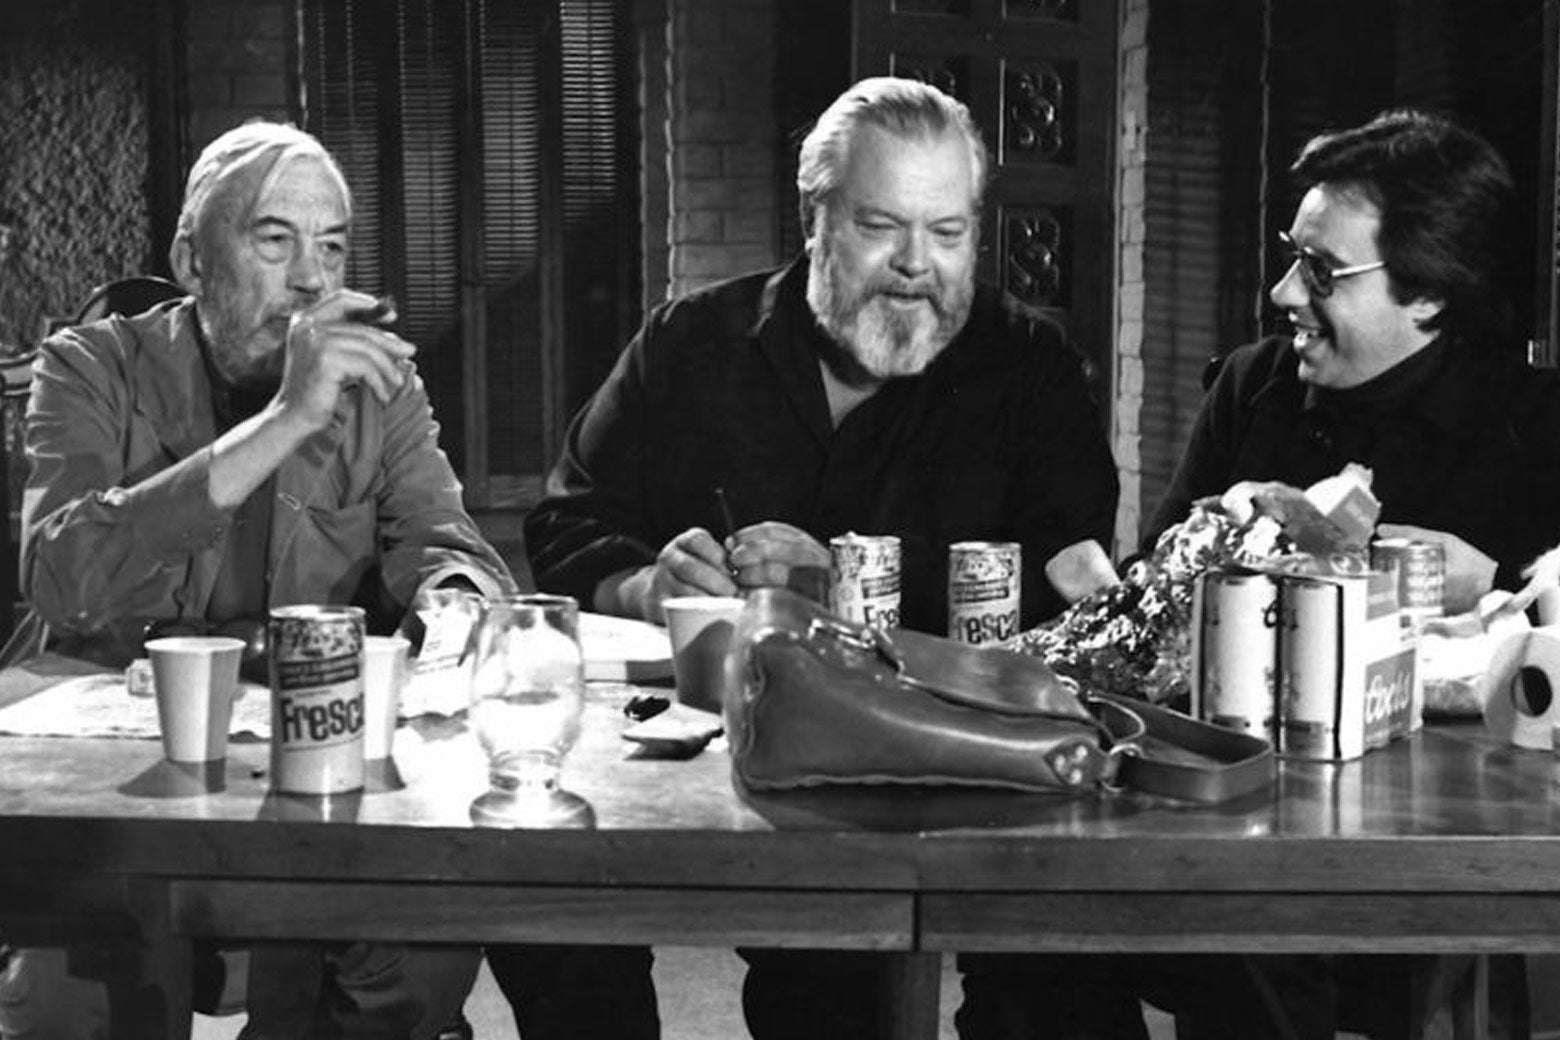 John Huston, Orson Welles, and Peter Bogdanovich in a scene from The Other Side of the Wind. They're seated at a table laden with cans of Fresca. Huston is smoking.